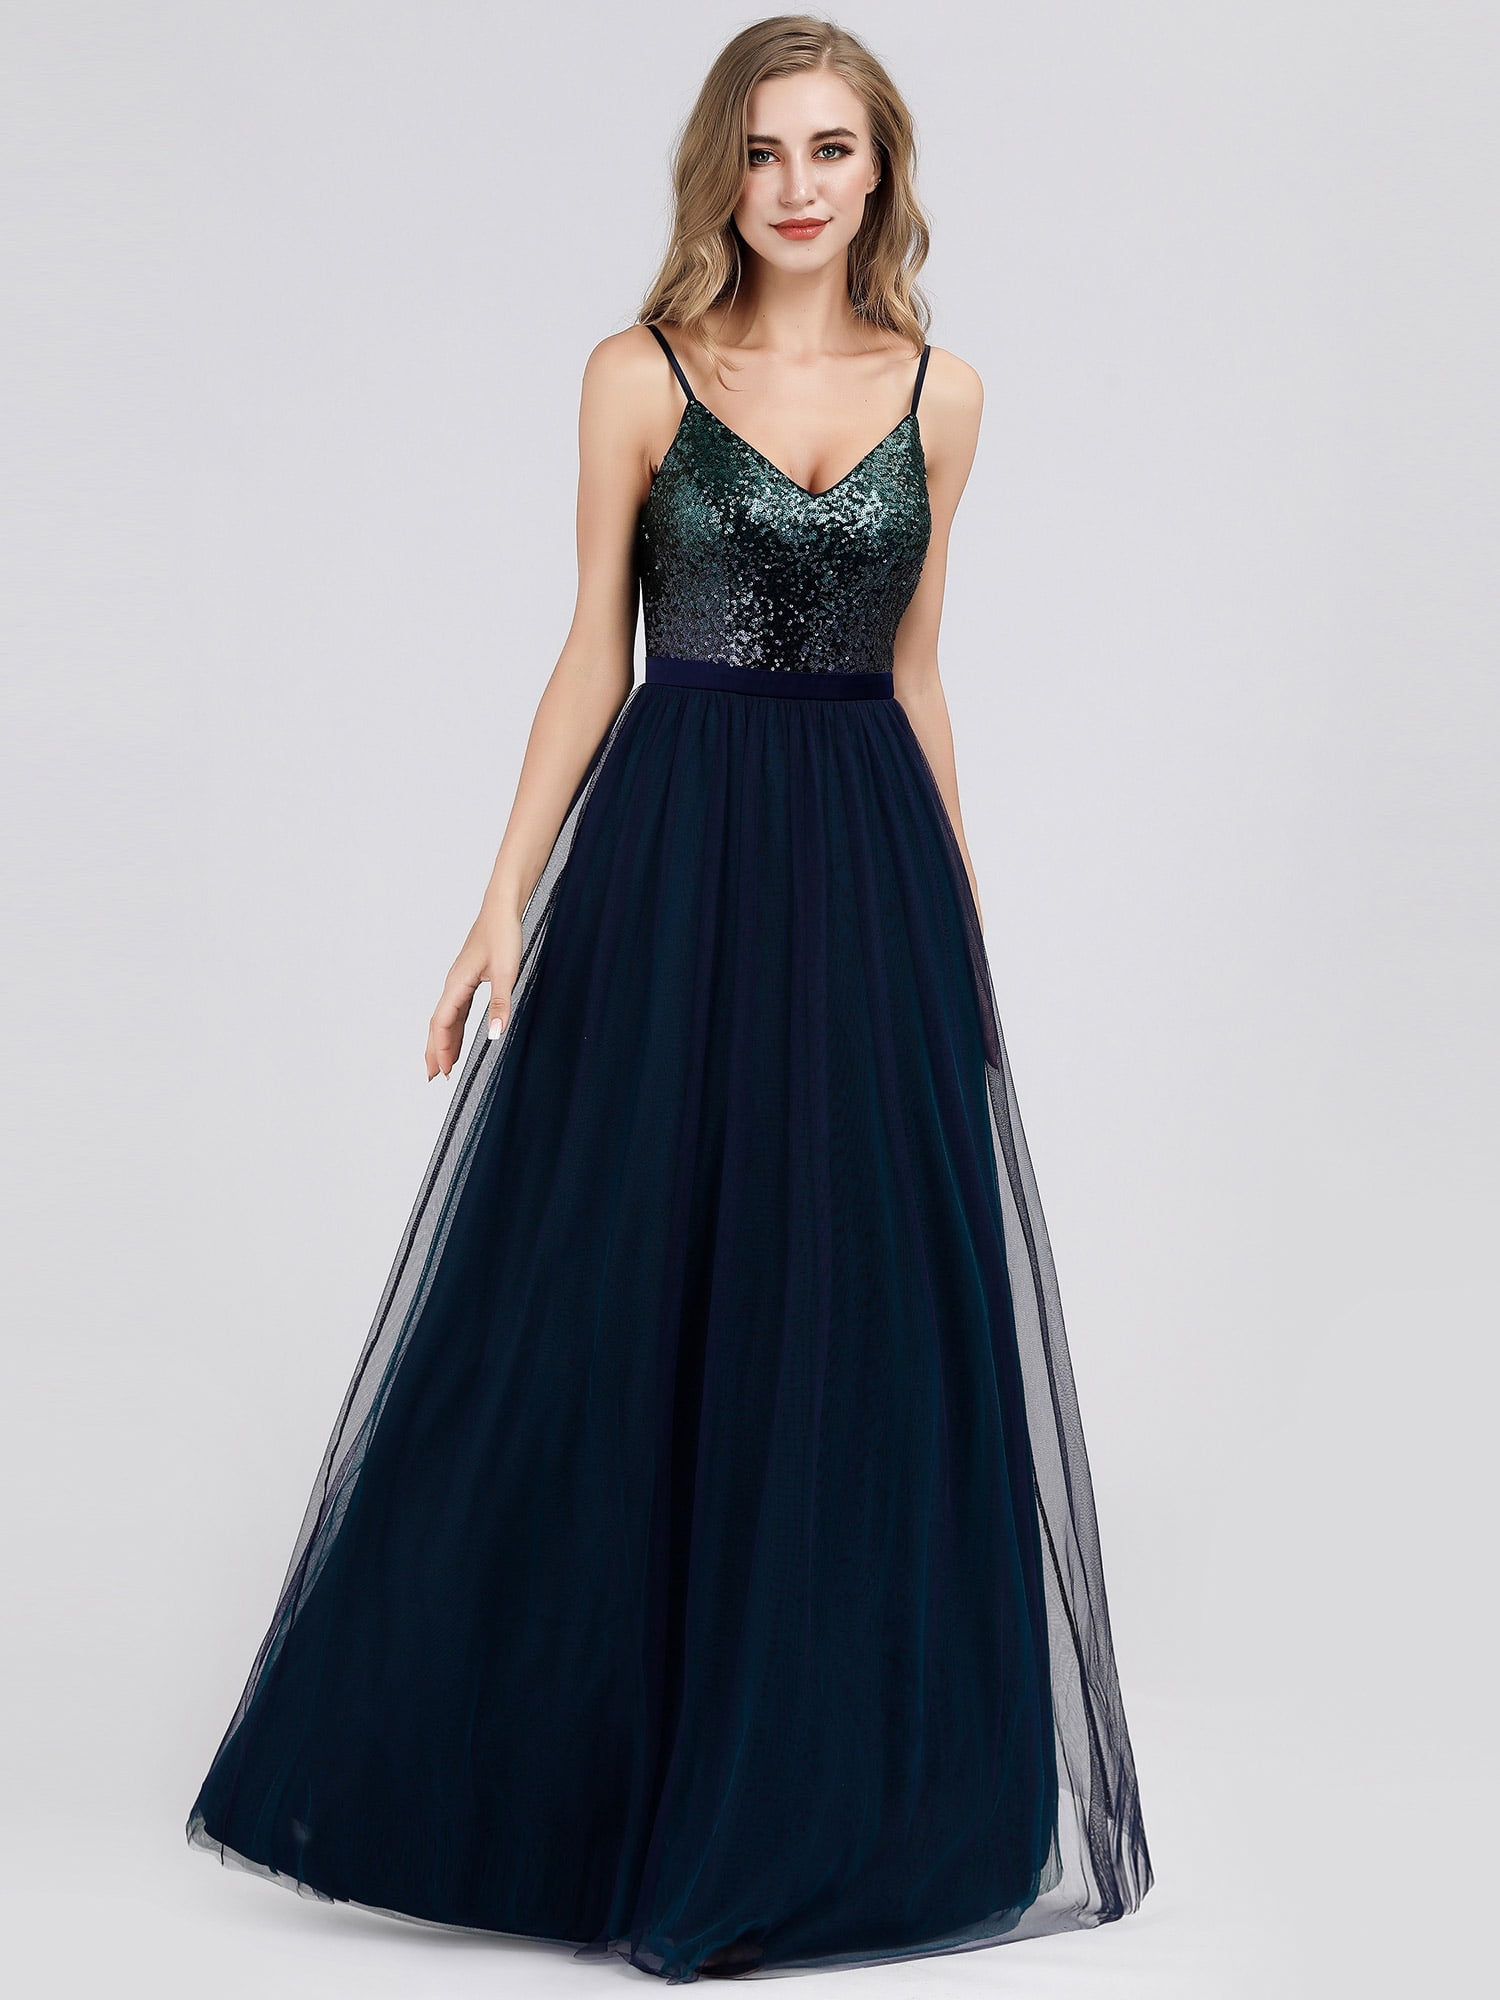 Ever-Pretty US Shoulder-Straps Long Evening Dress Sequins Homecoming Prom Gowns 